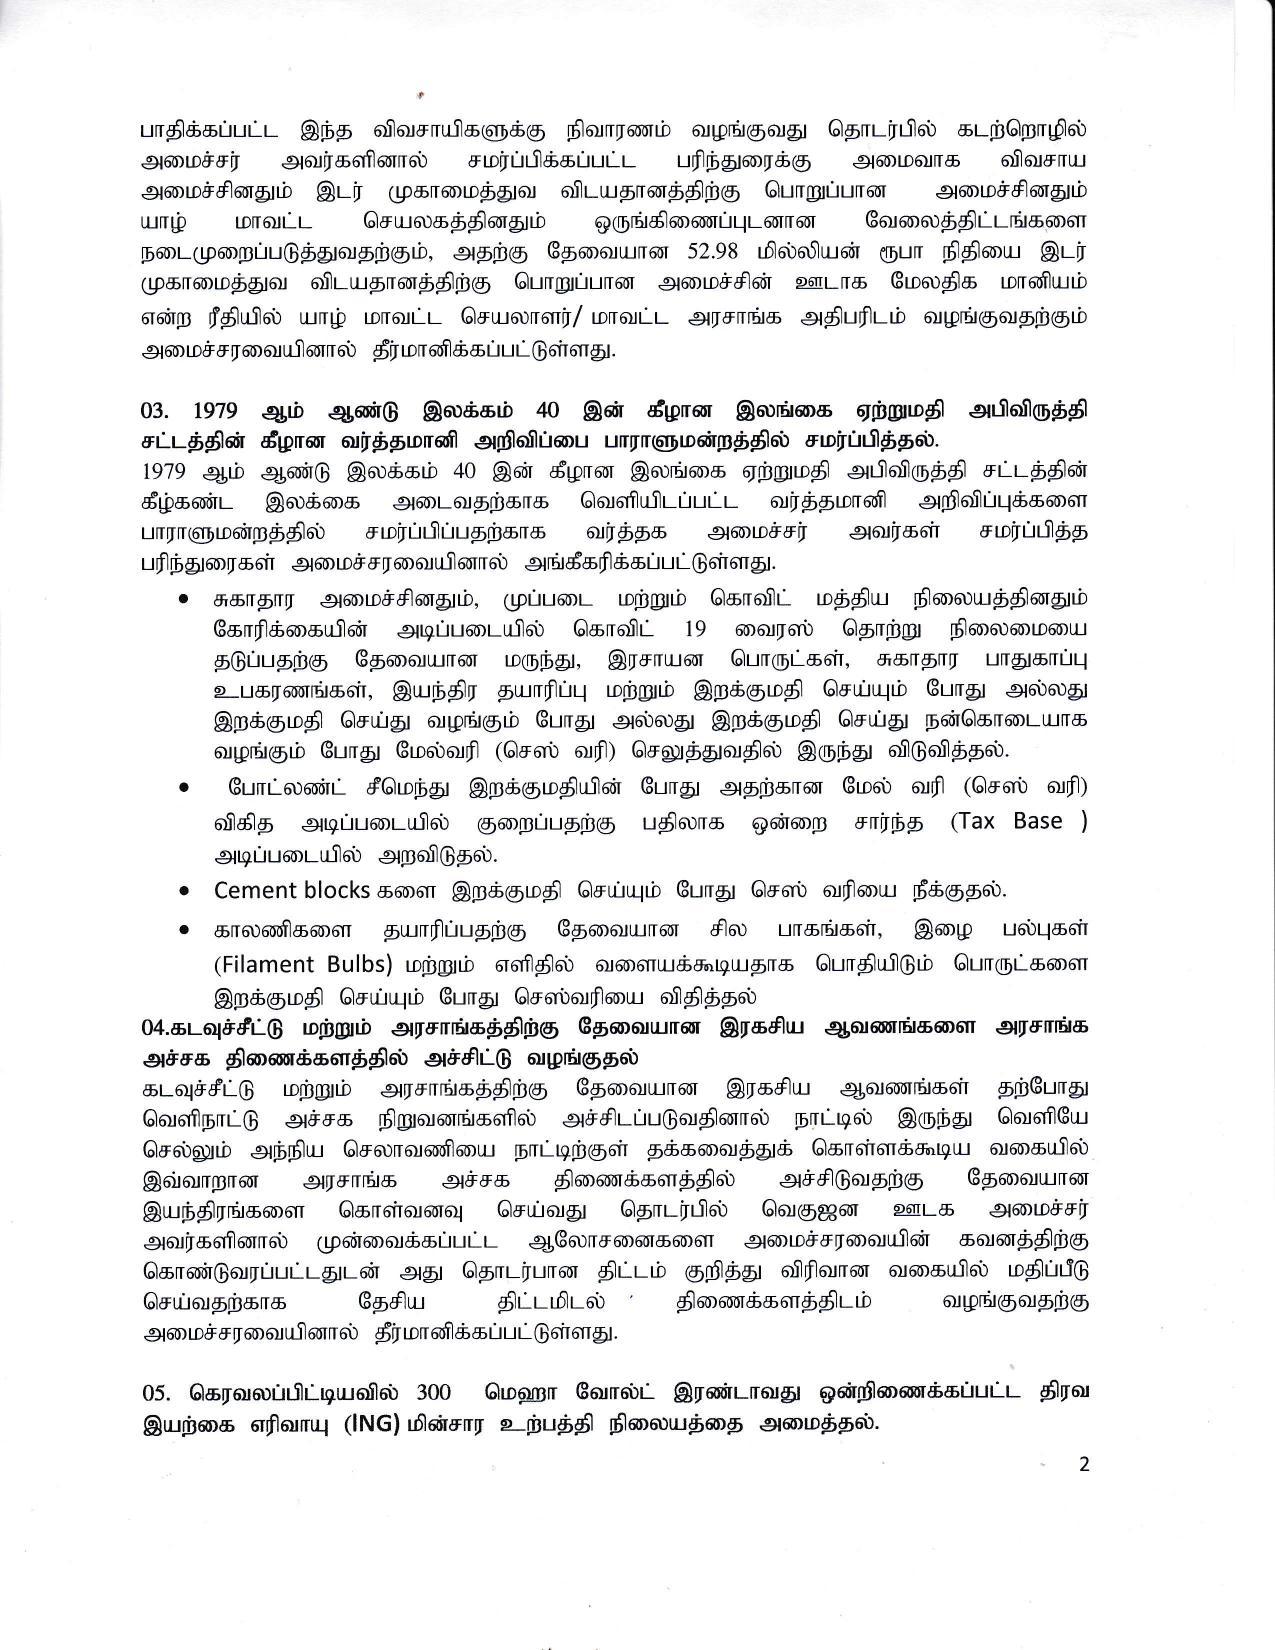 Cabinet Decision on 16.09.2020 0 Tamil 1 page 002